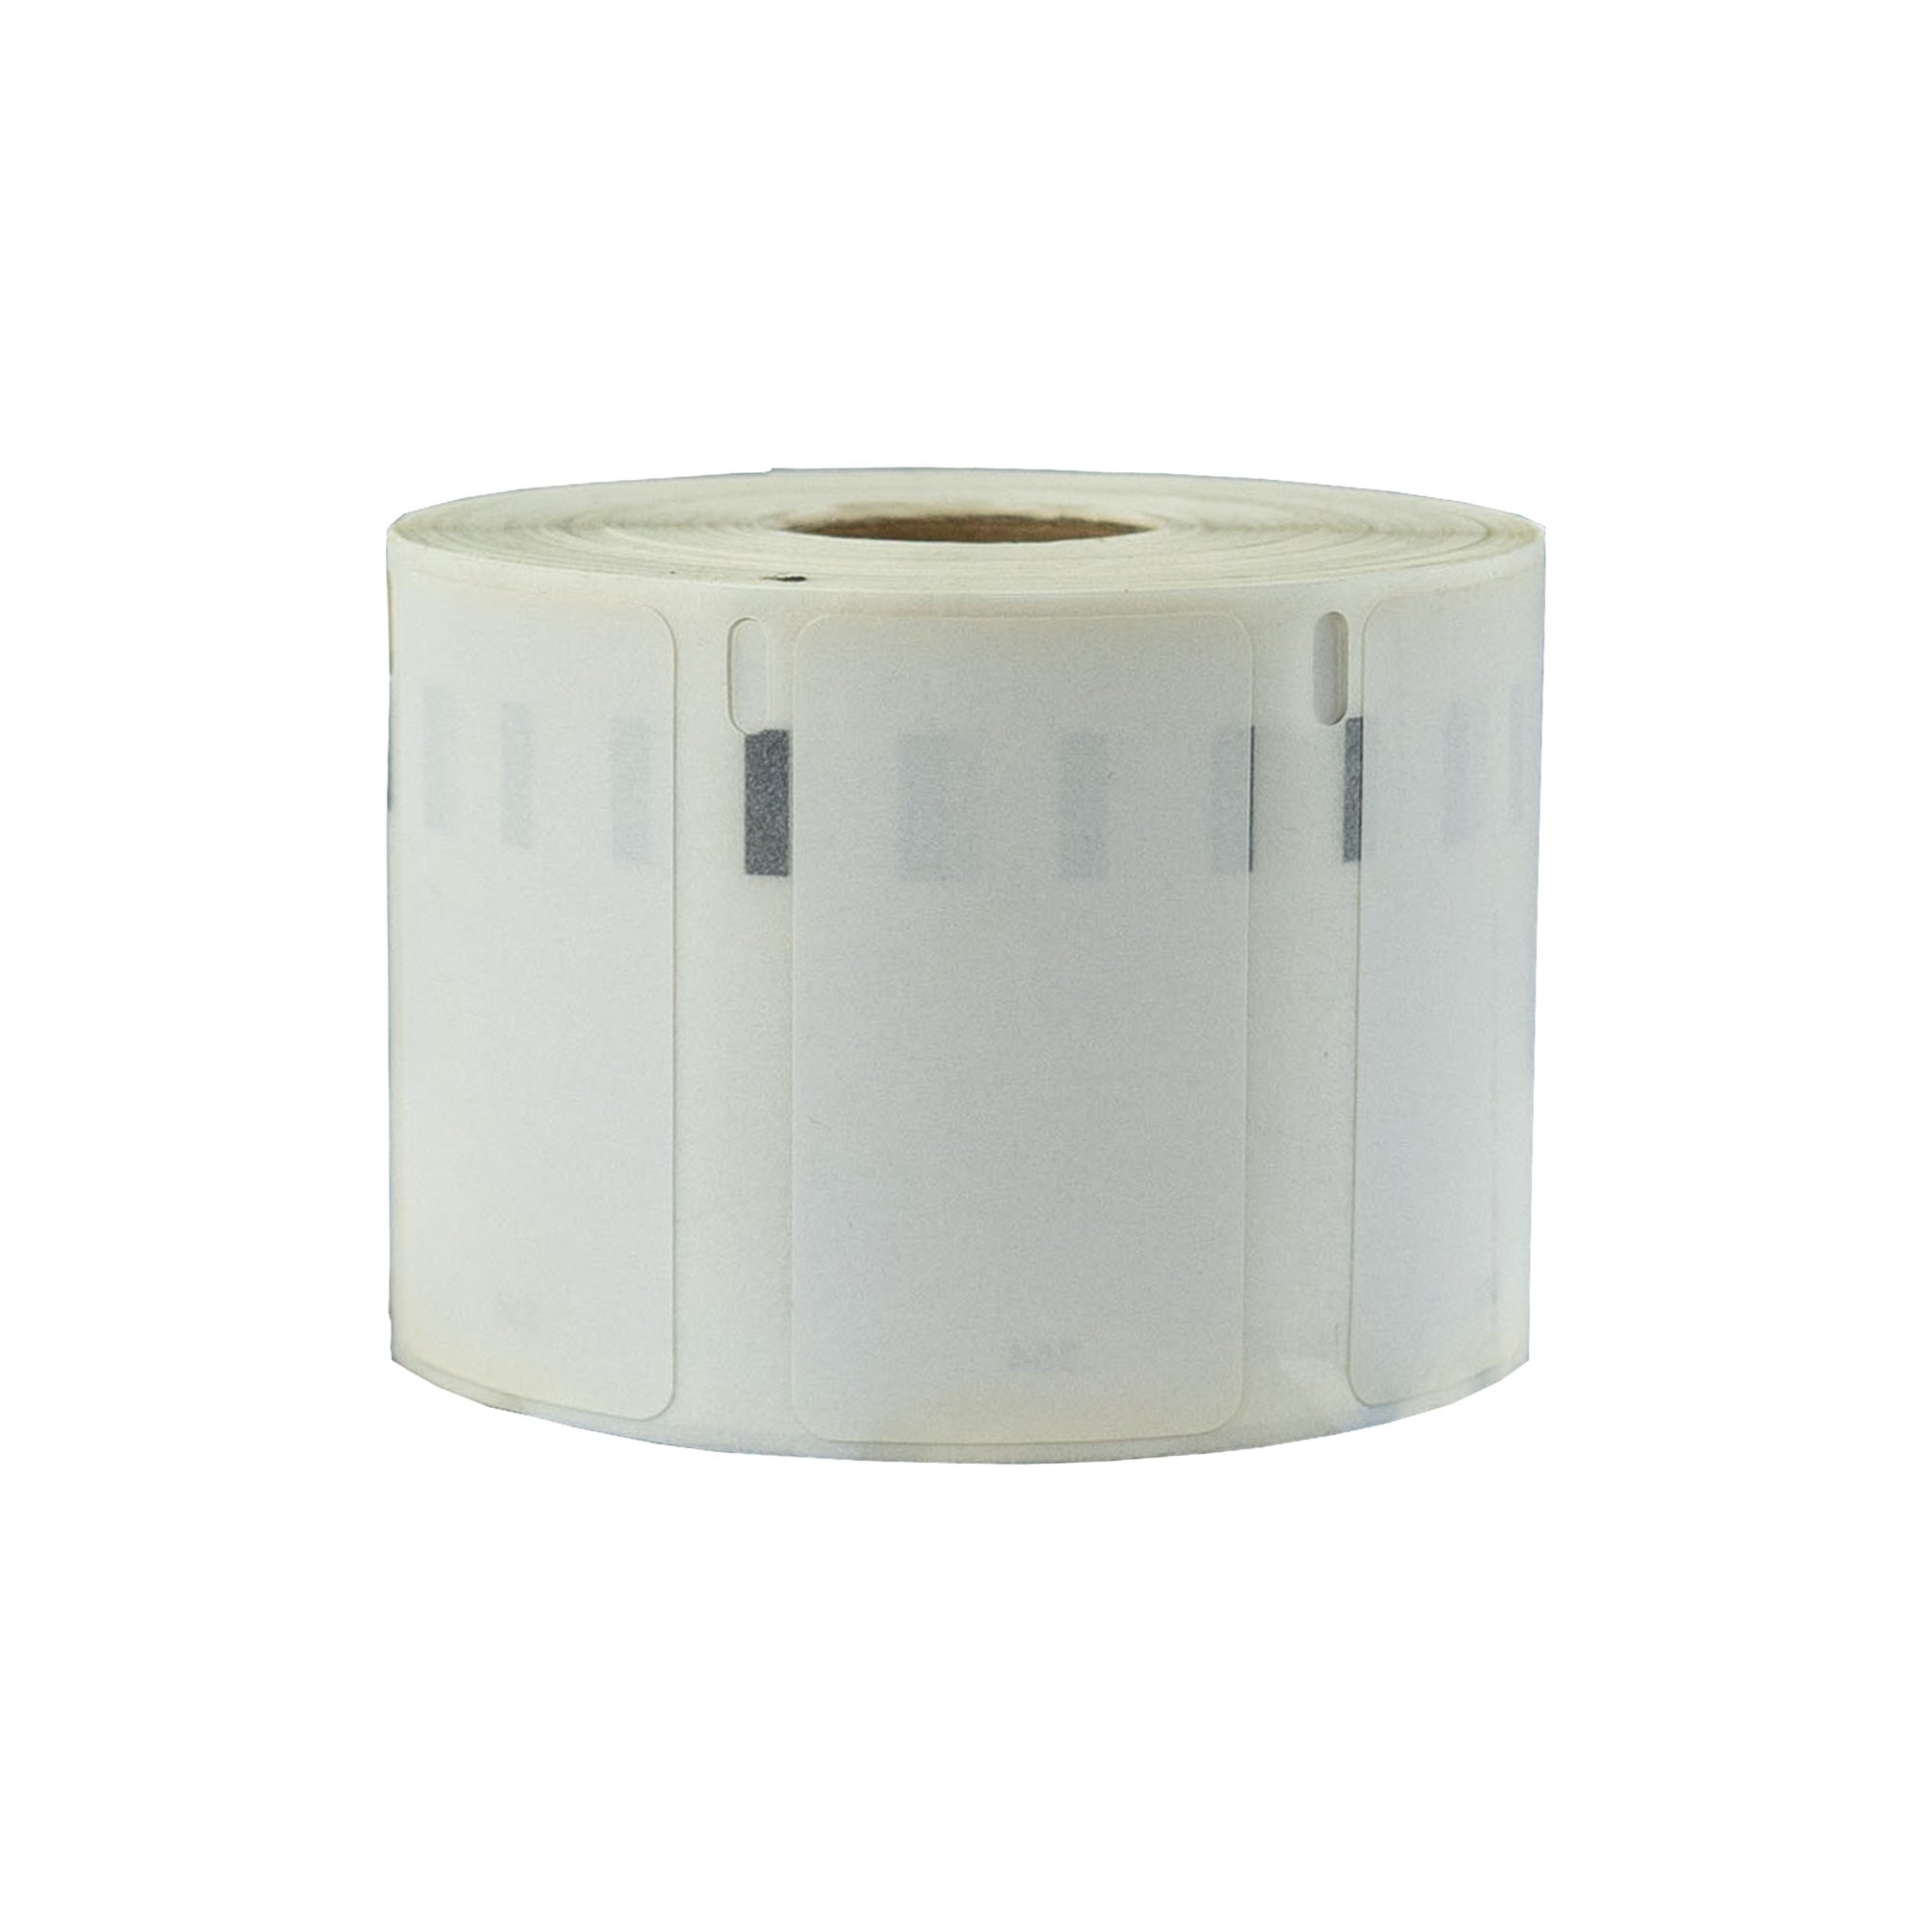 Compatible Dymo 11354 Film Label Tapes 57 x 32mm/ 50 Rolls